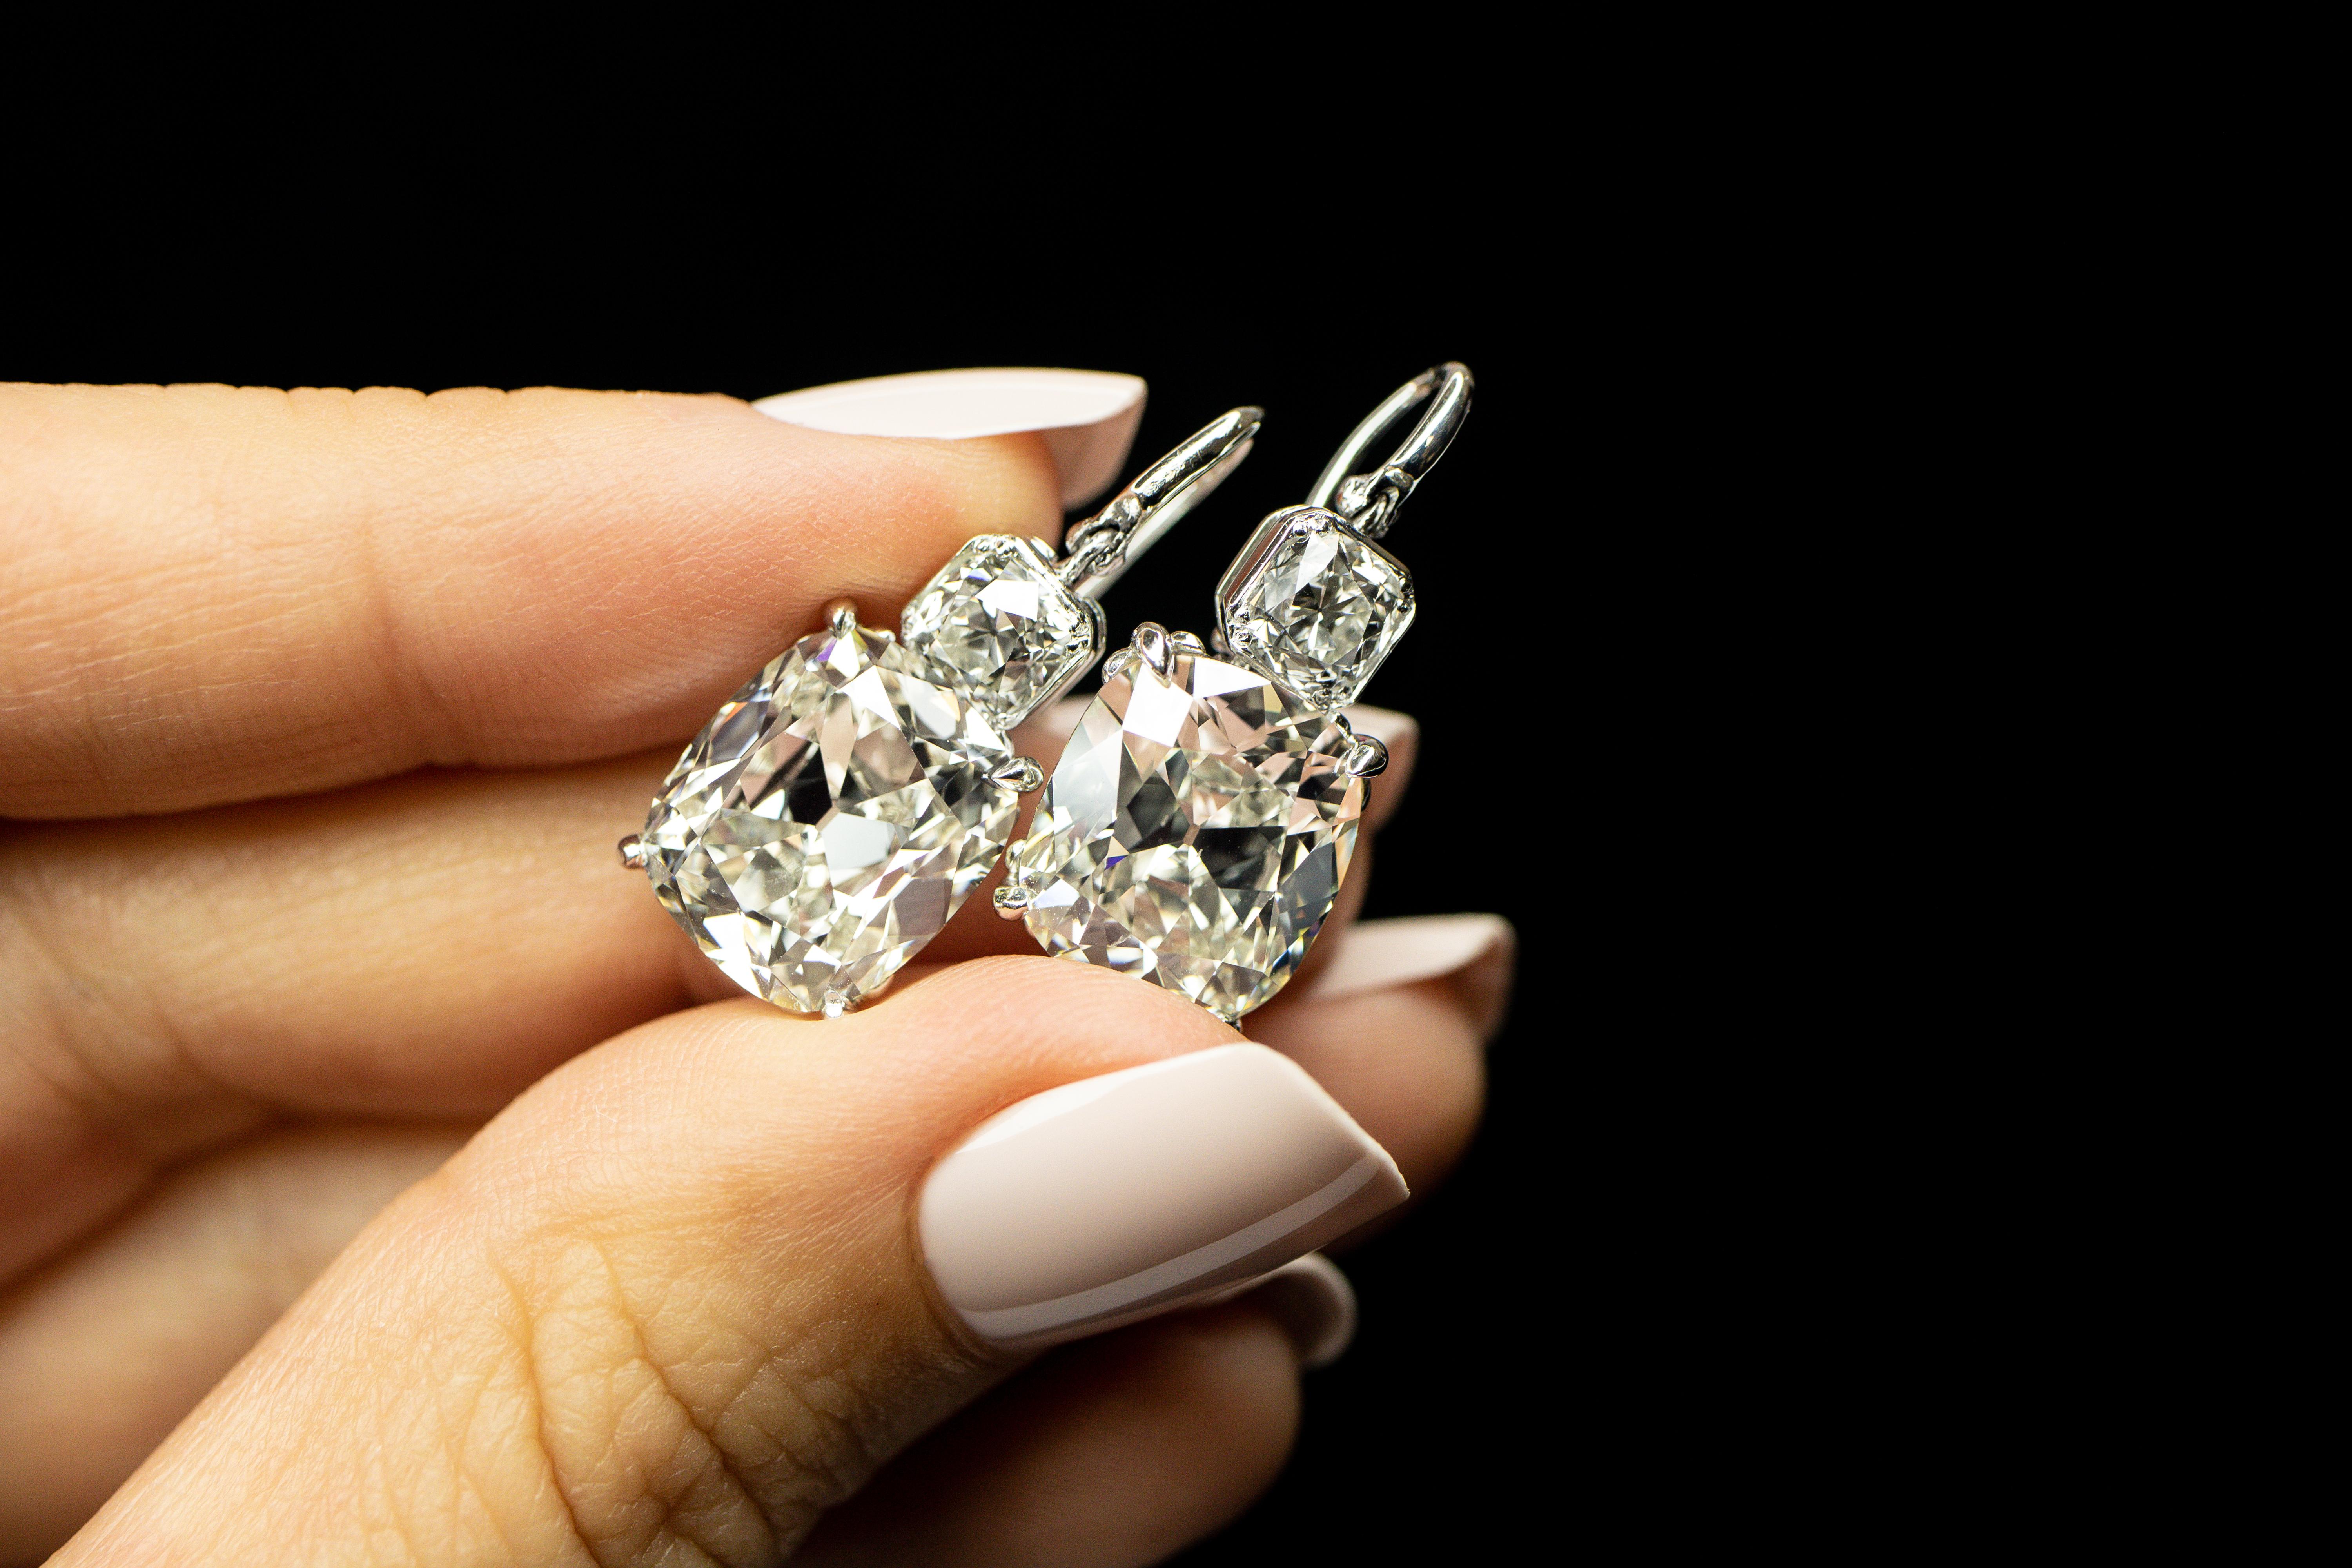 Vintage Oscar Heyman Earrings from Circa 1920’s. This exquisite is something you won’t see replicated and will feel proud to own and wear. 

12.41ct total of Antique Cushion cut diamonds masterfully set in platinum. 

Set in 18k White gold 6.06ct CU